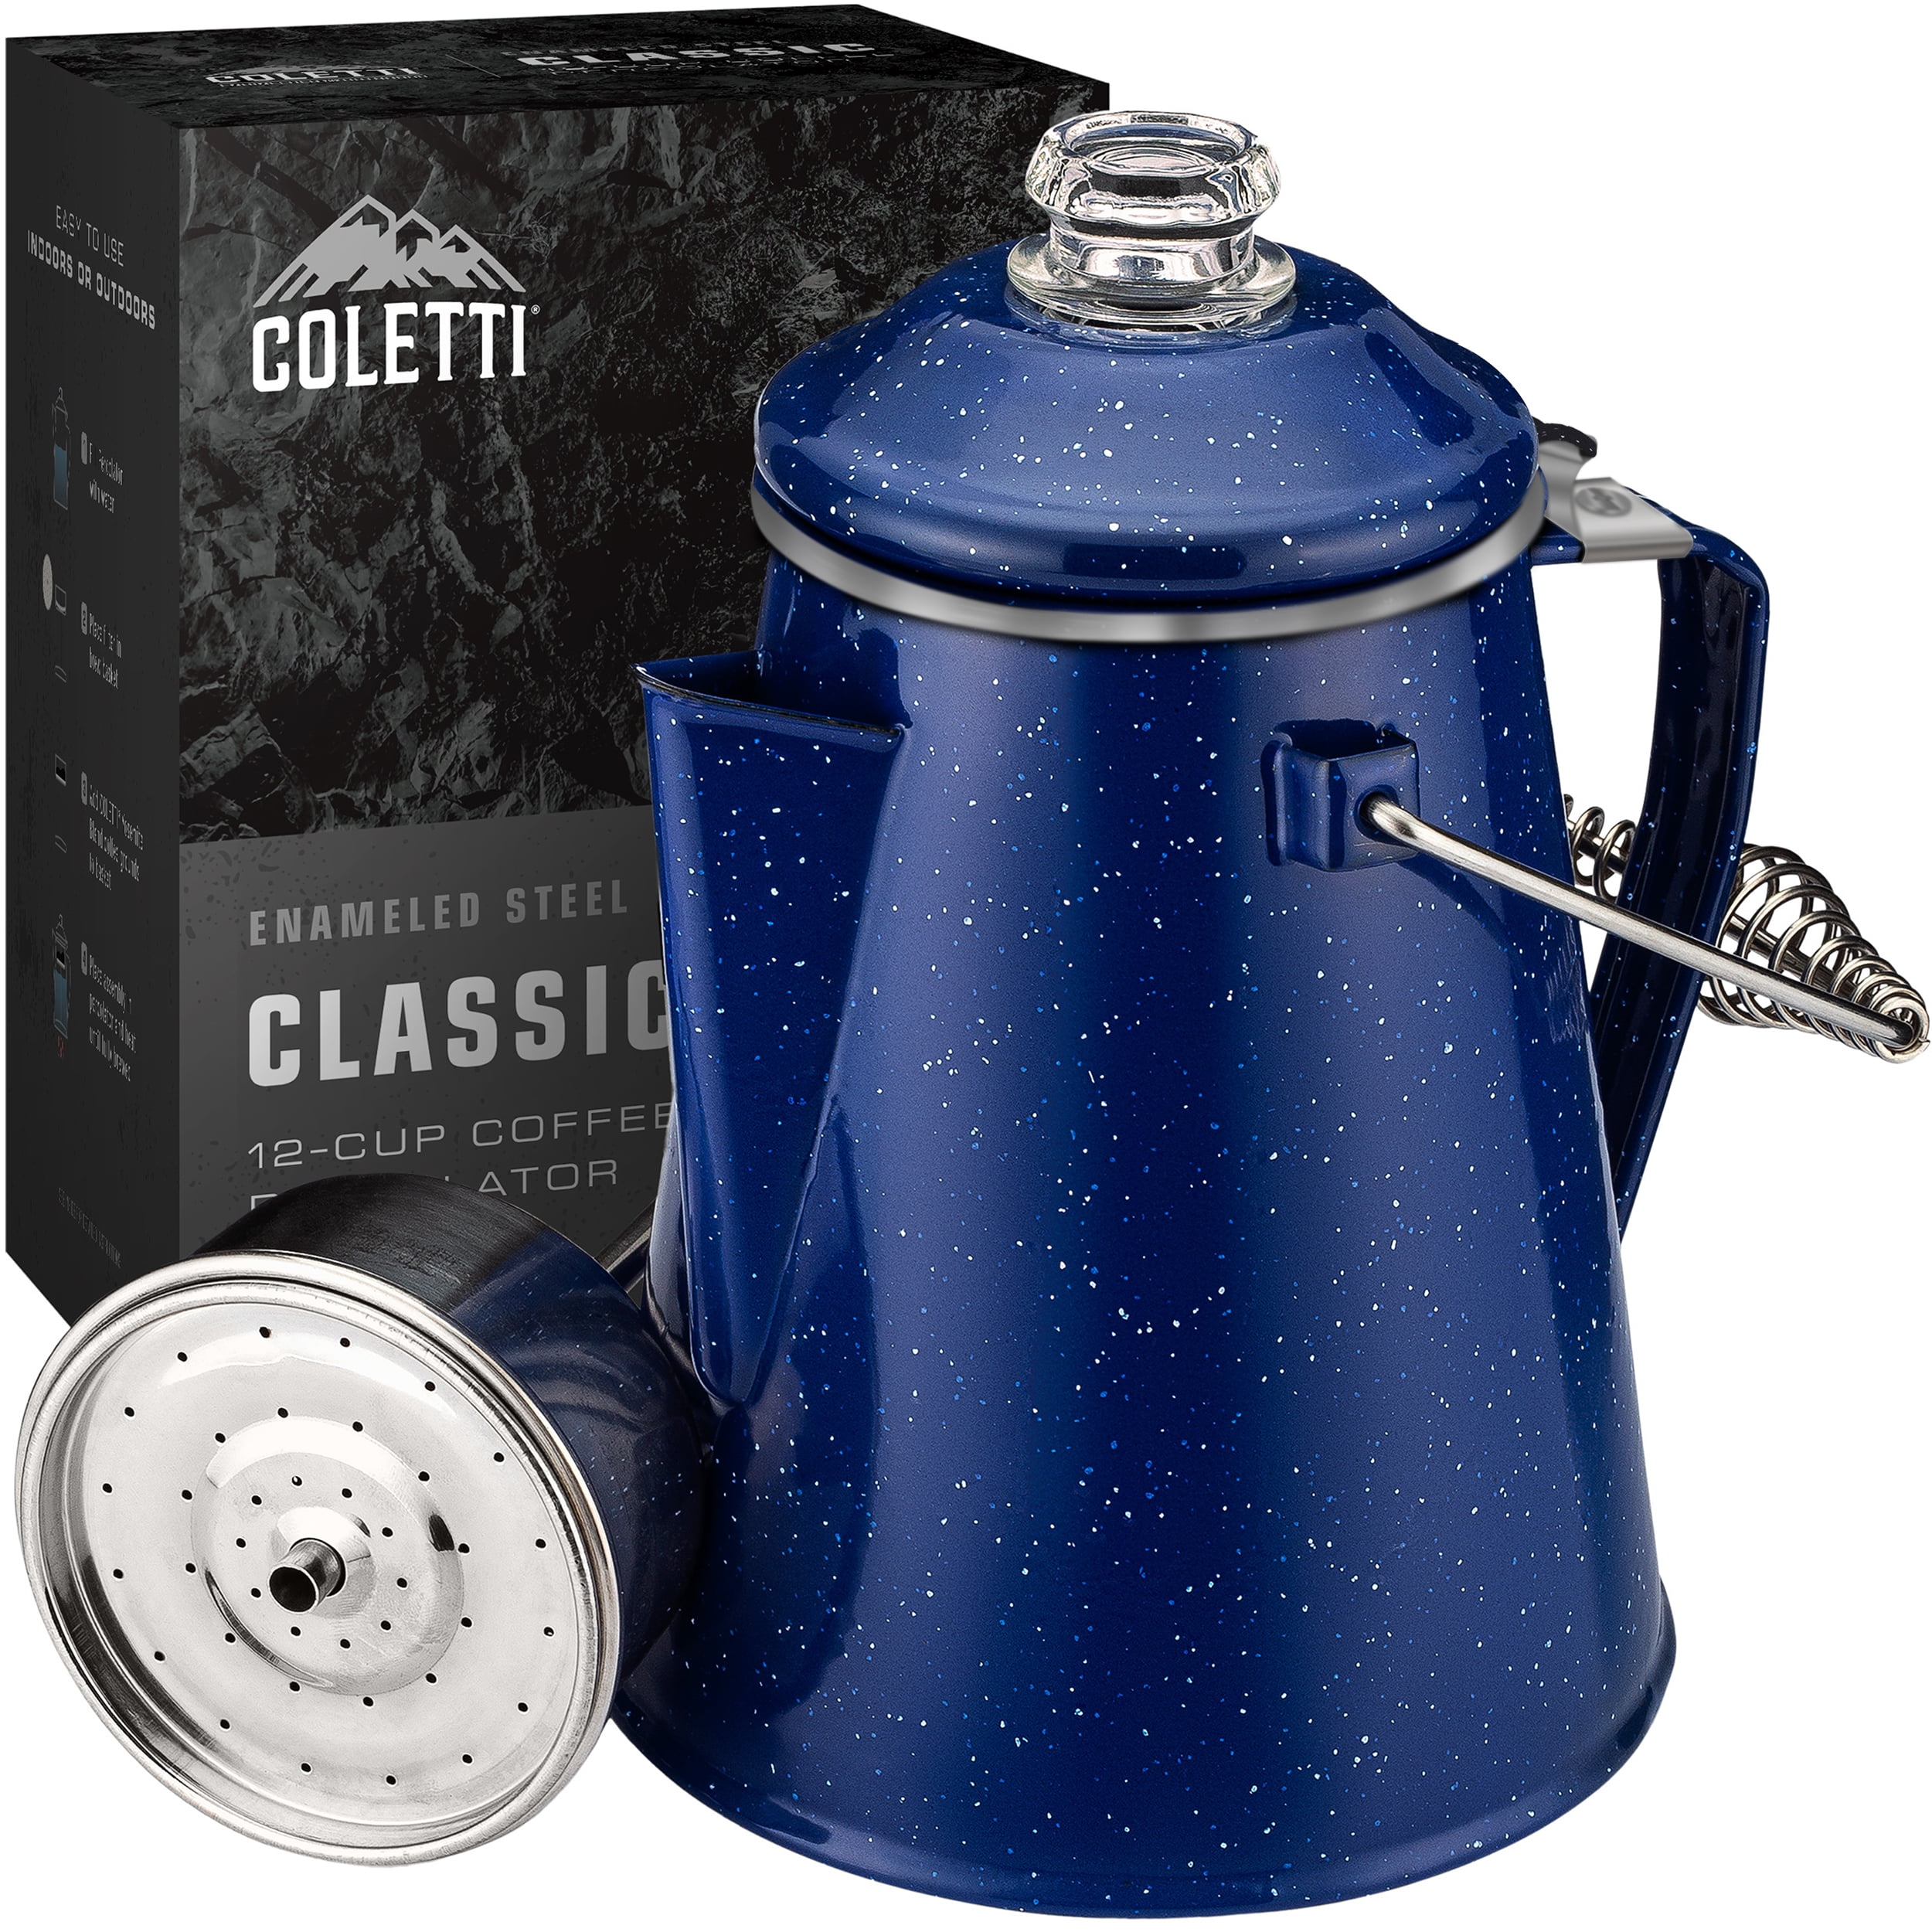 COLETTI Classic Camping Coffee Percolator - Camping Coffee Pot - 12 Cup Enamelware Percolator Coffee Pot for Campsite, Cabin, Hunting, Fishing, Backpacking, & RV -New in Box